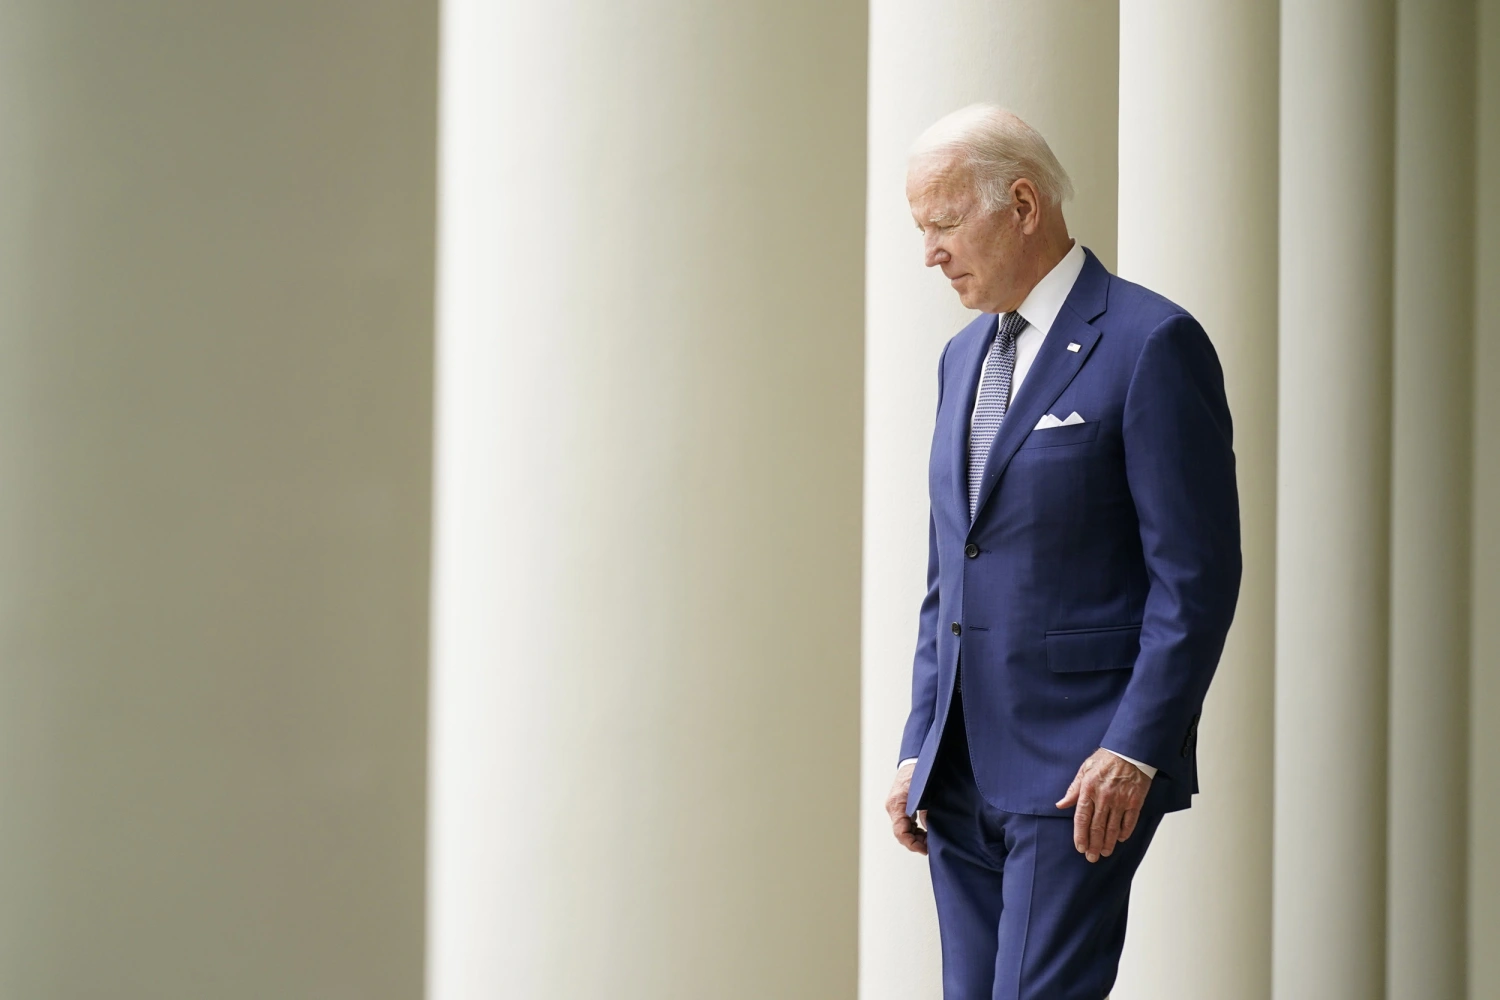 Guns, drugs and migrants: Biden heads to Mexico toface diplomatic challenges with North American allies